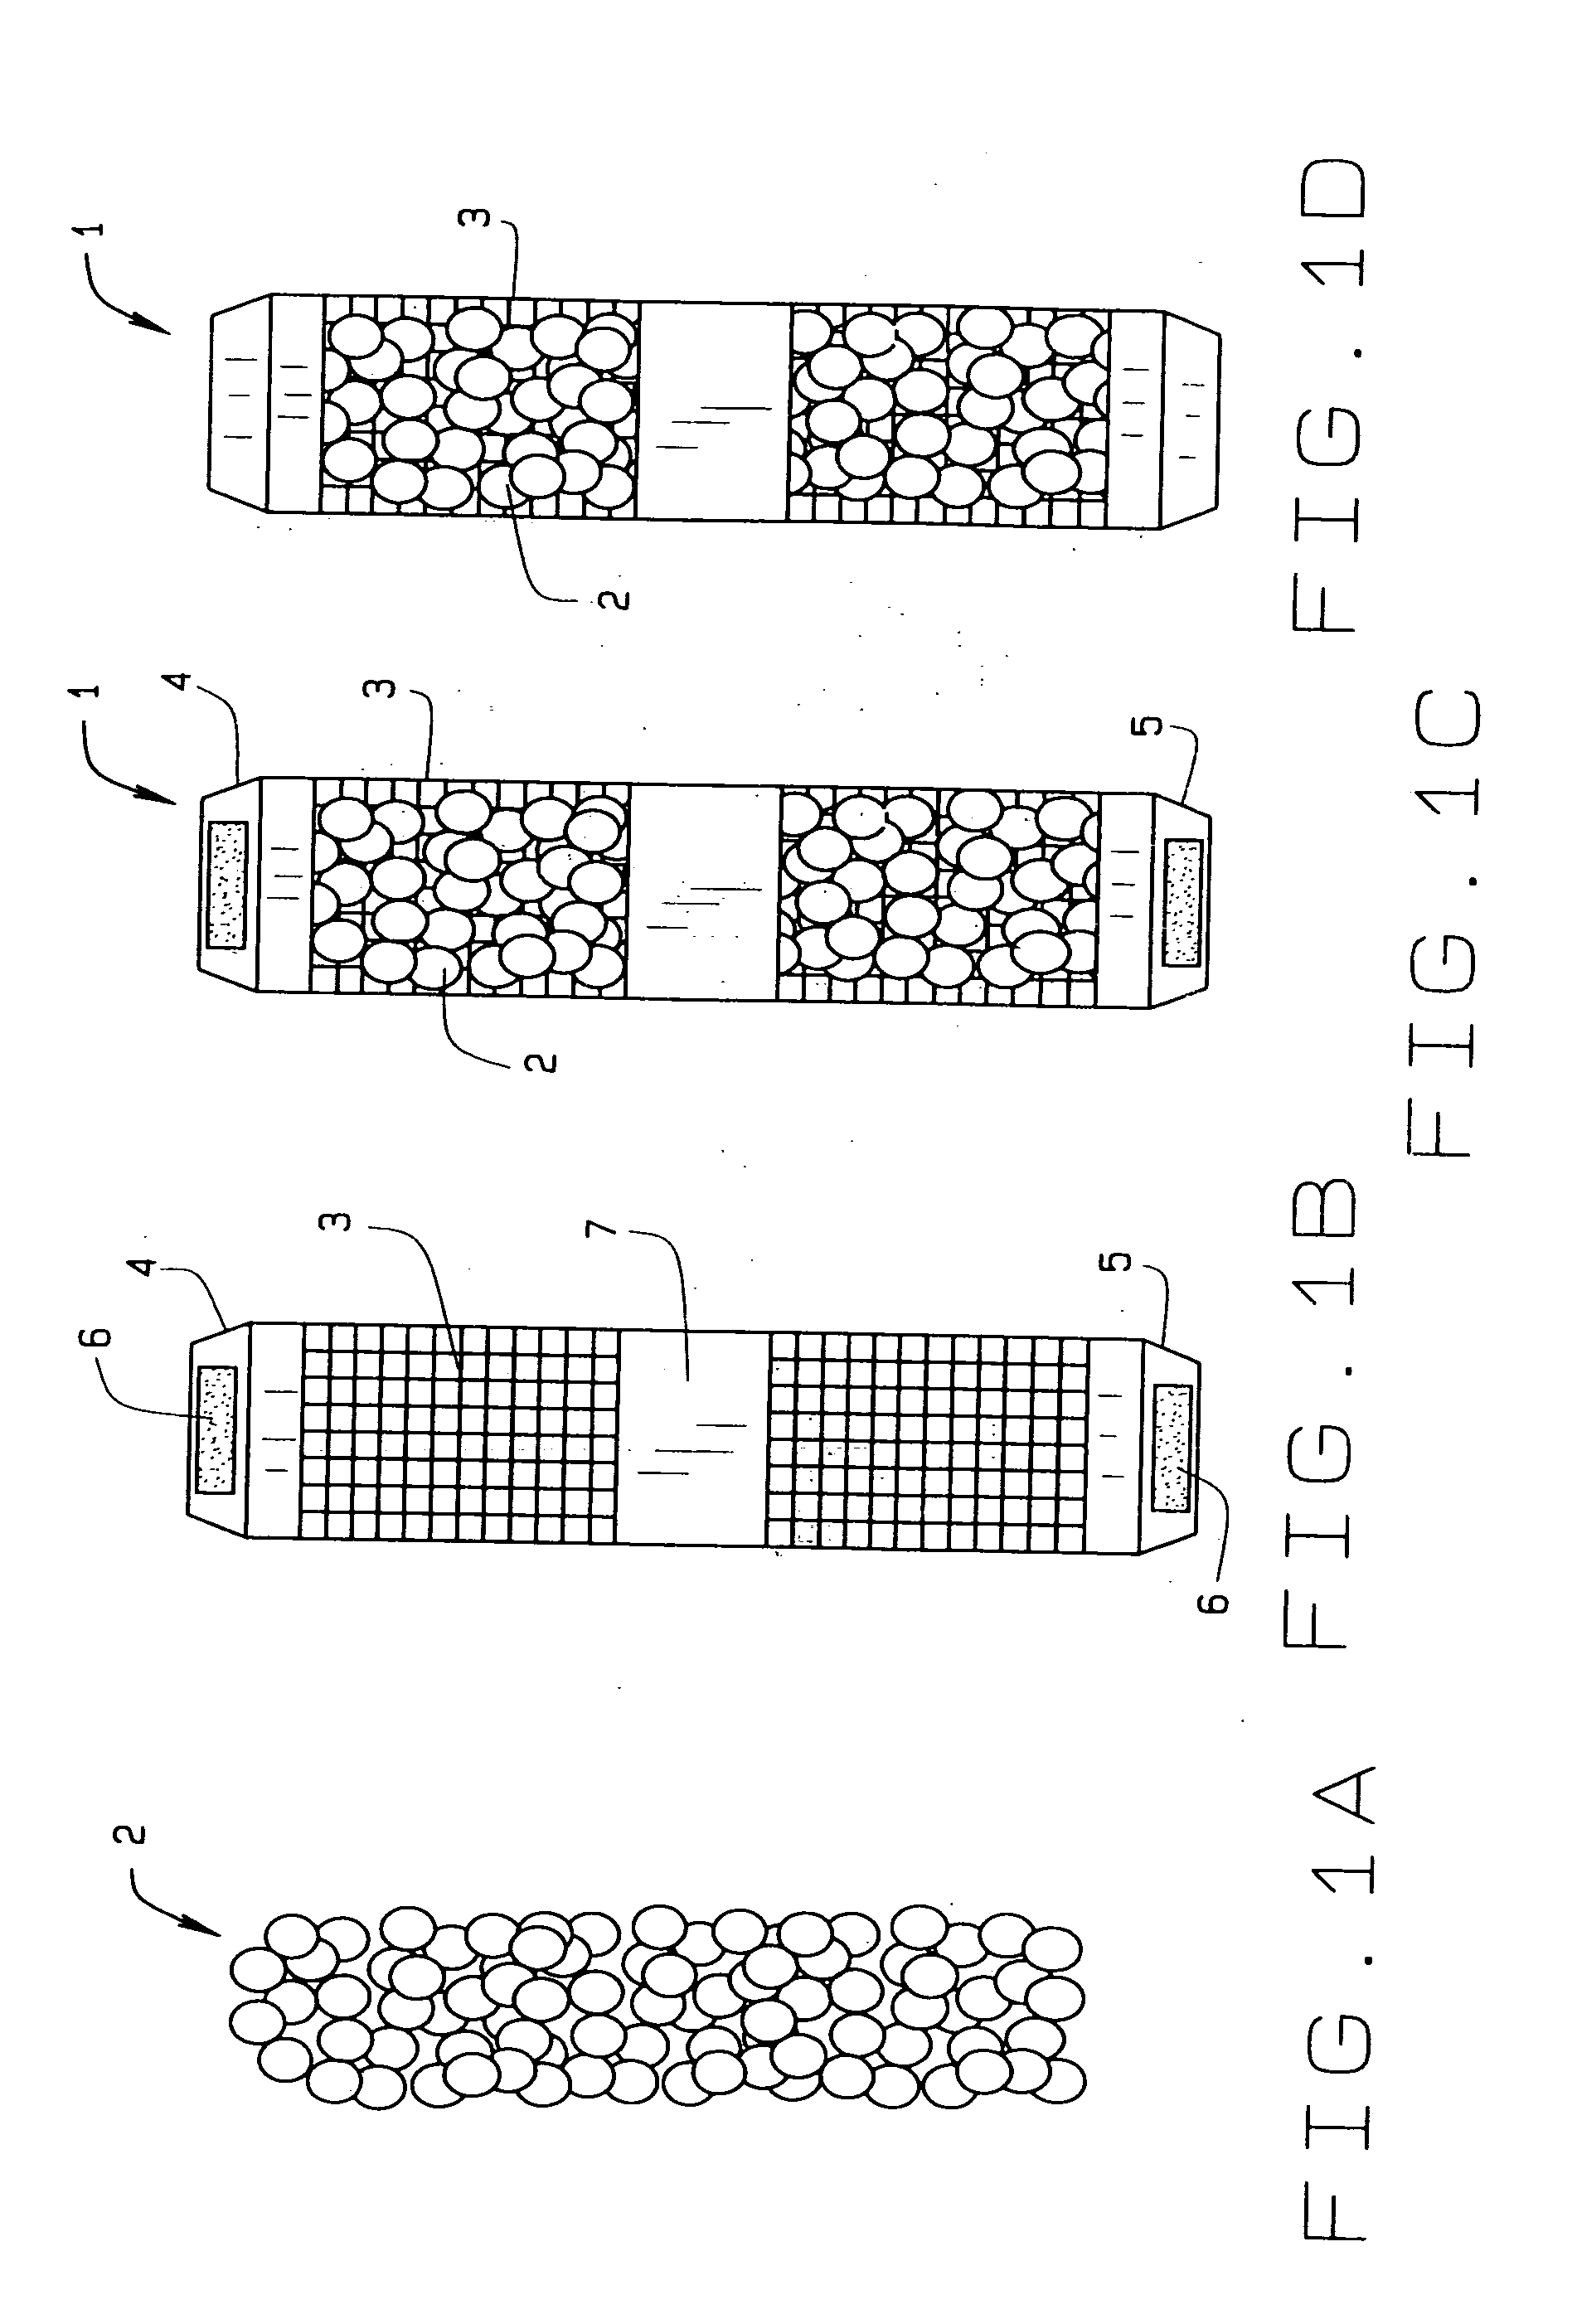 Attachment to air moving device or system for the purpose of scenting spaces